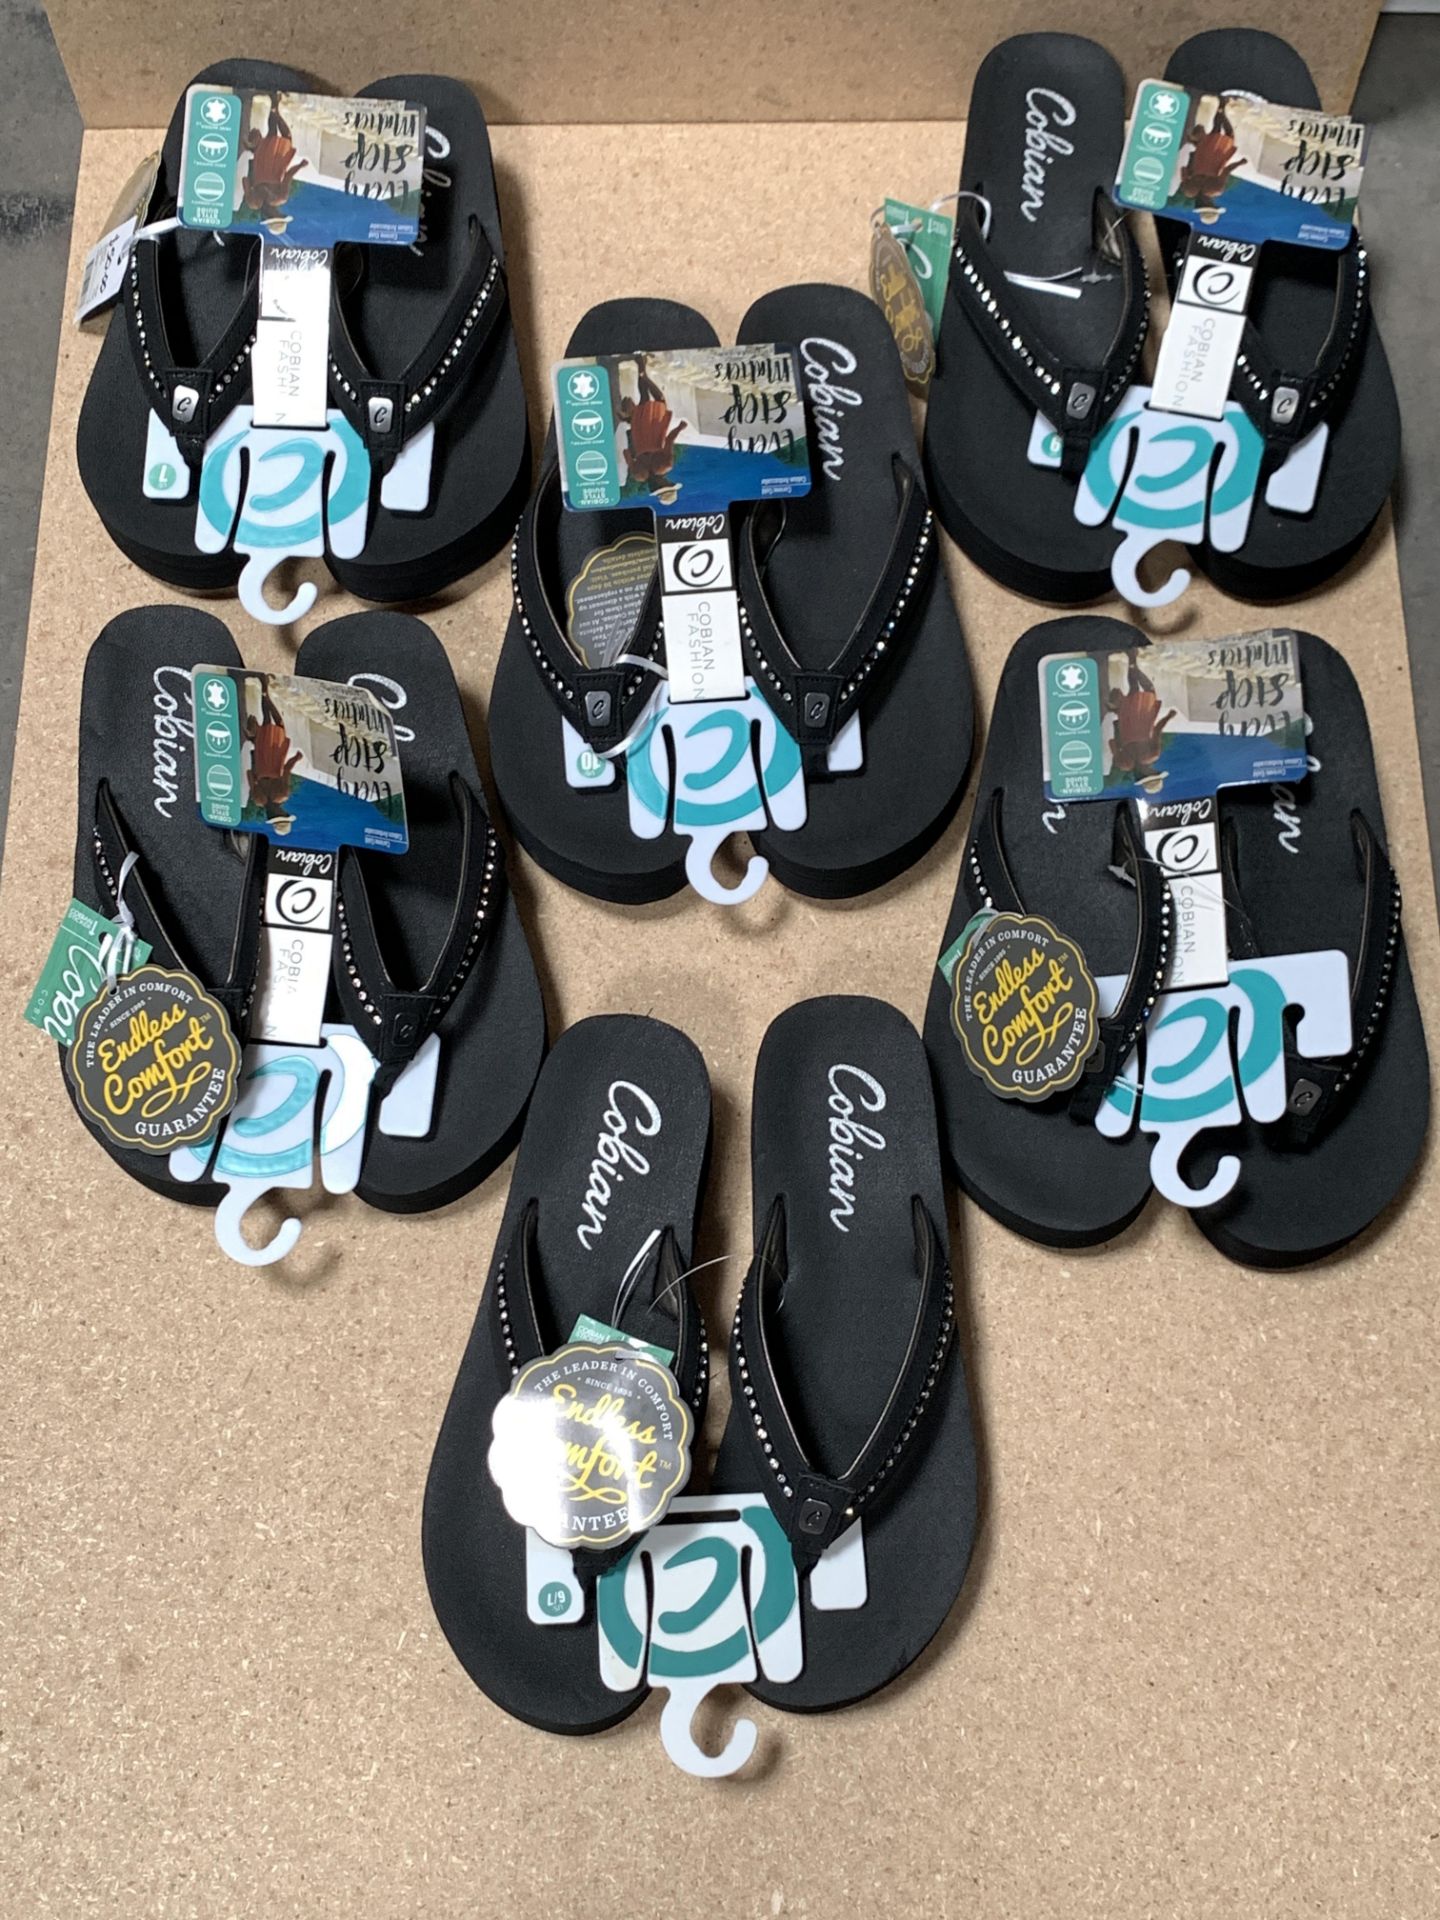 6 Pairs Cobian Flip Flop Sandals, Tiffany w. Crystals, New w. Tags, Various Sizes (Retail $300) - Image 2 of 5